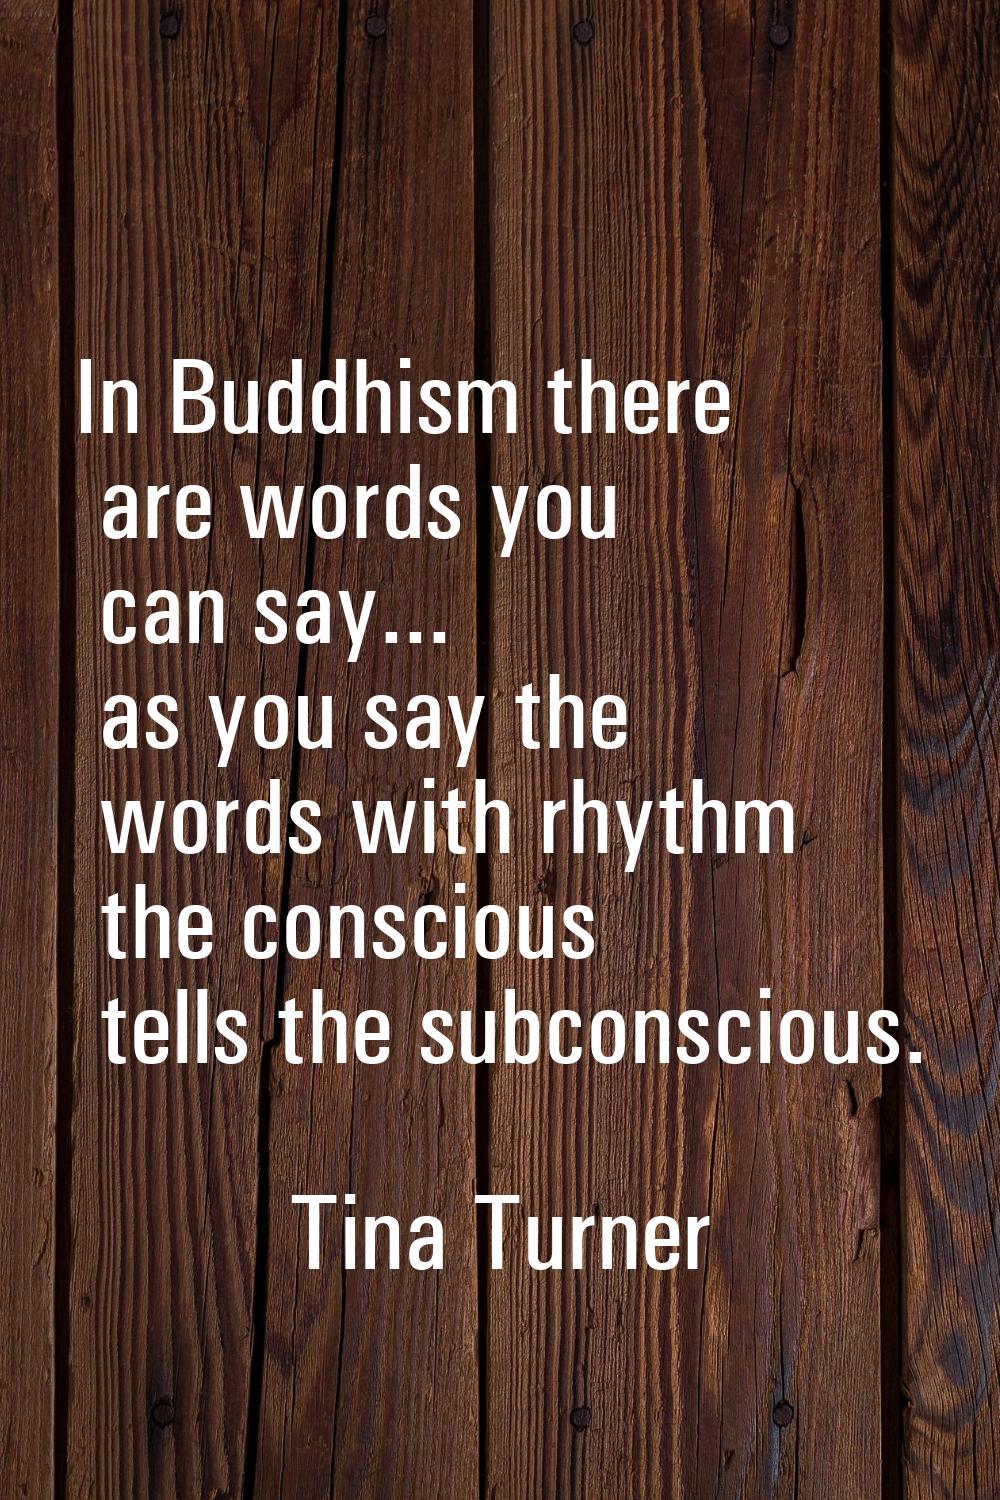 In Buddhism there are words you can say... as you say the words with rhythm the conscious tells the